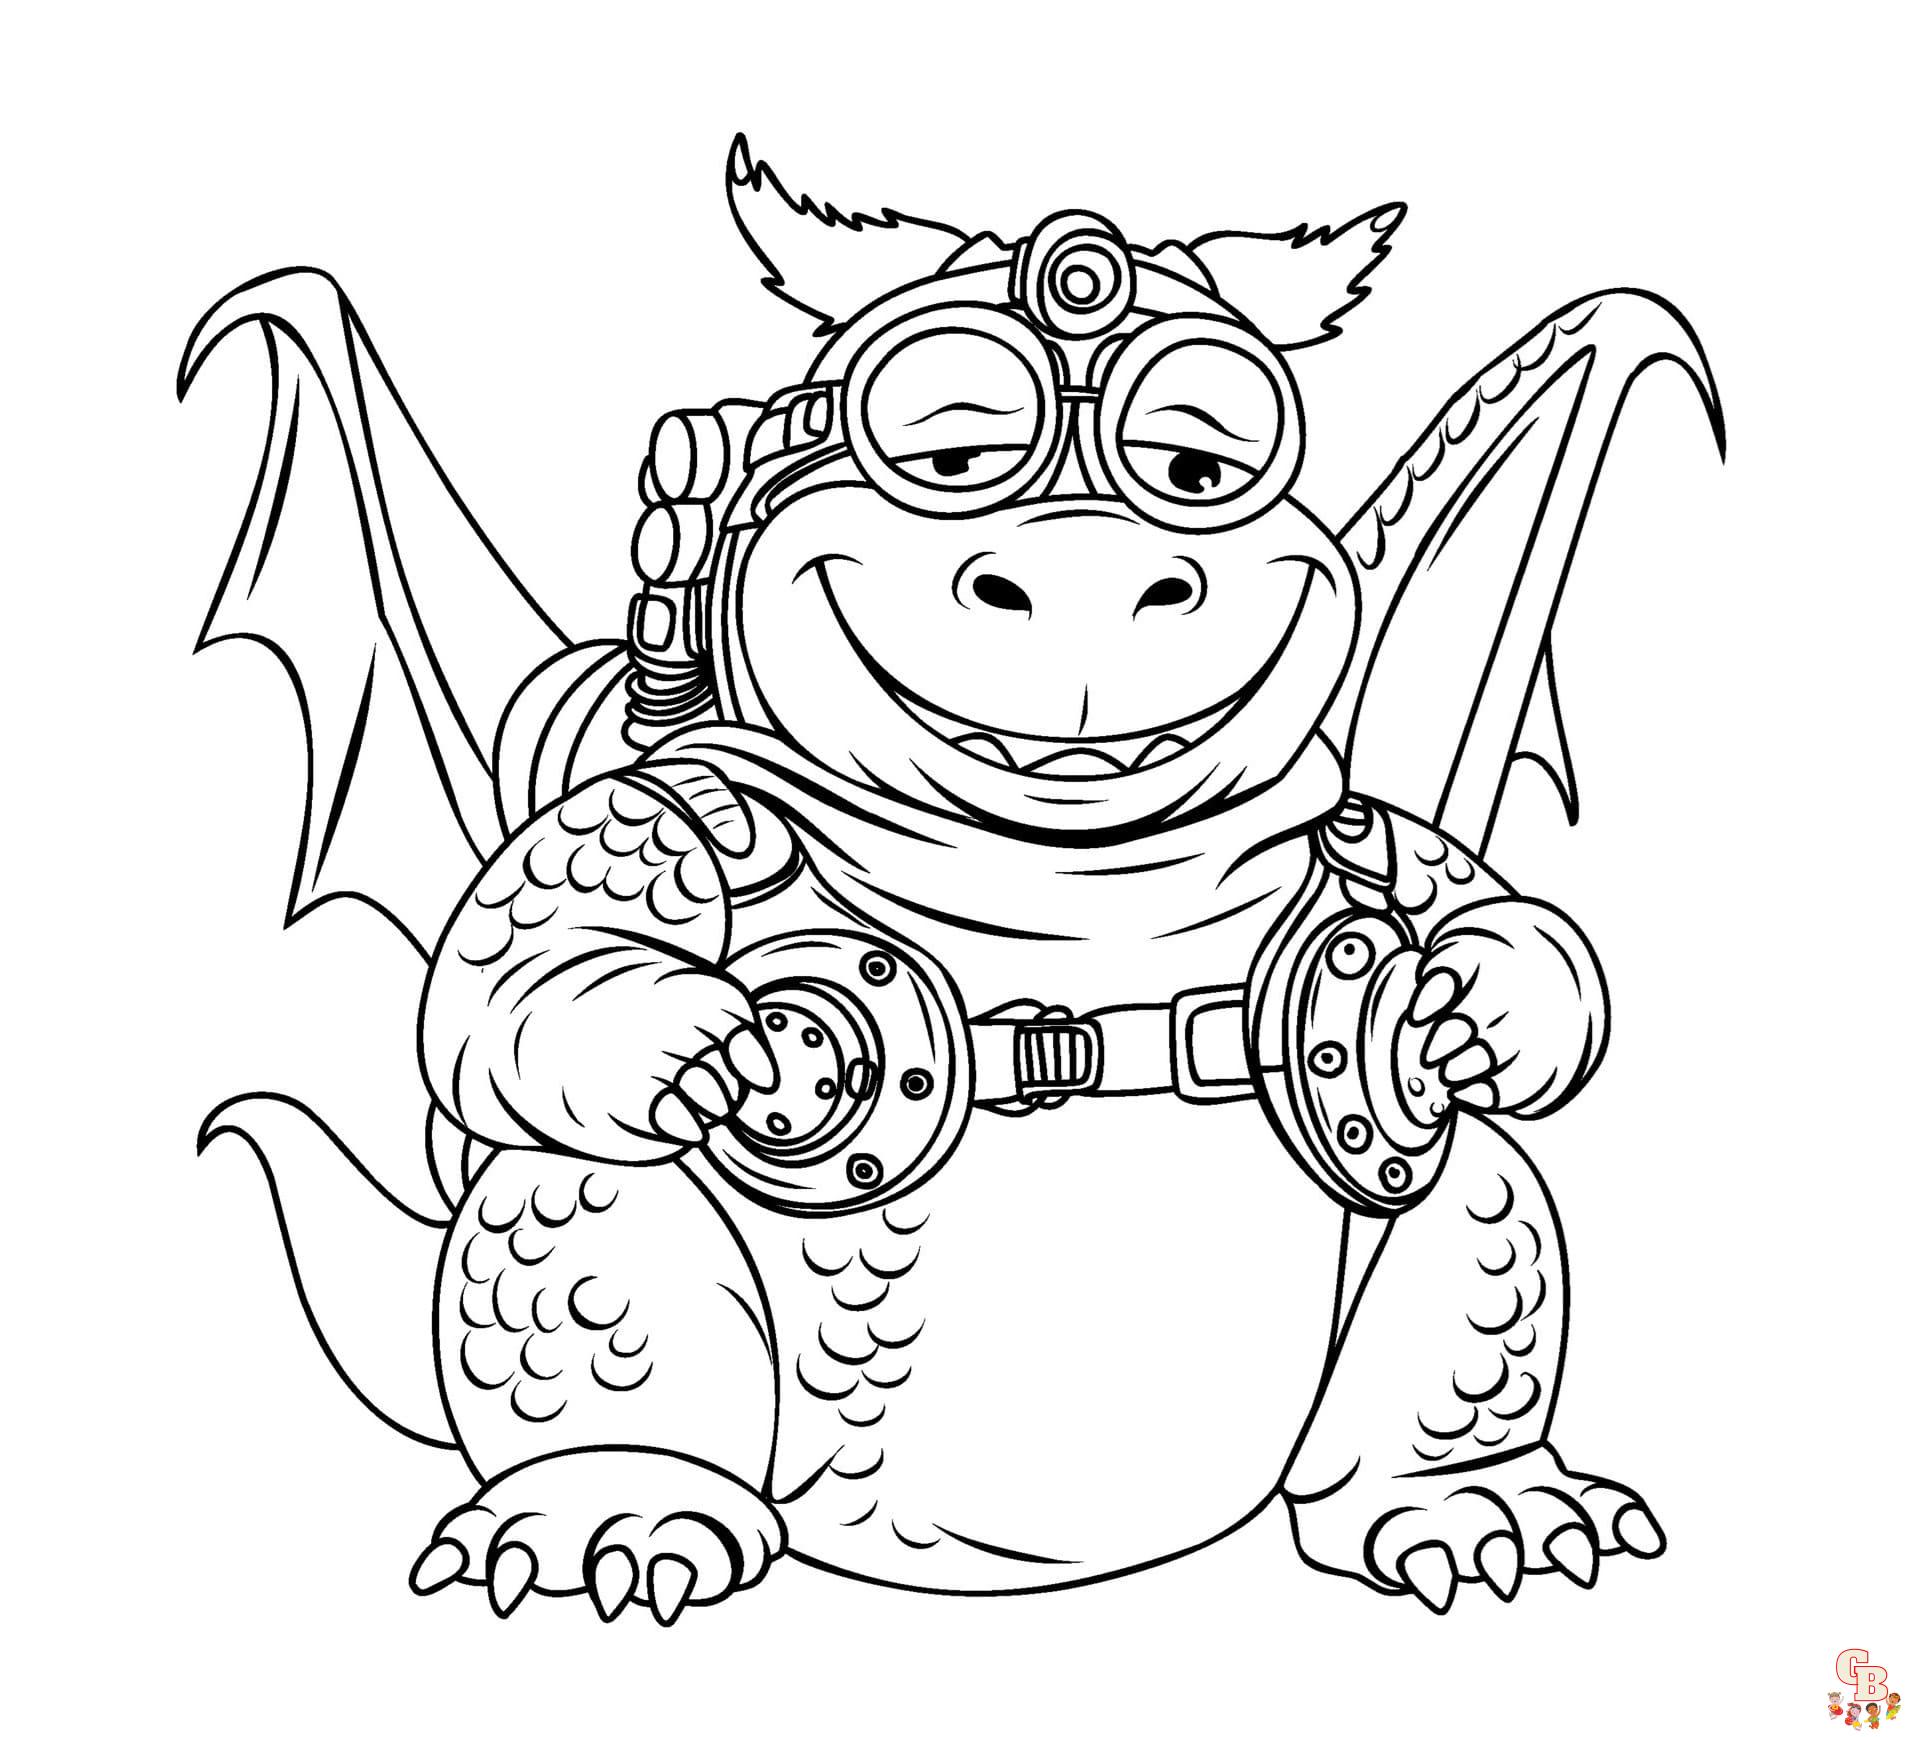 Printable rescue riders coloring pages free for kids and adults